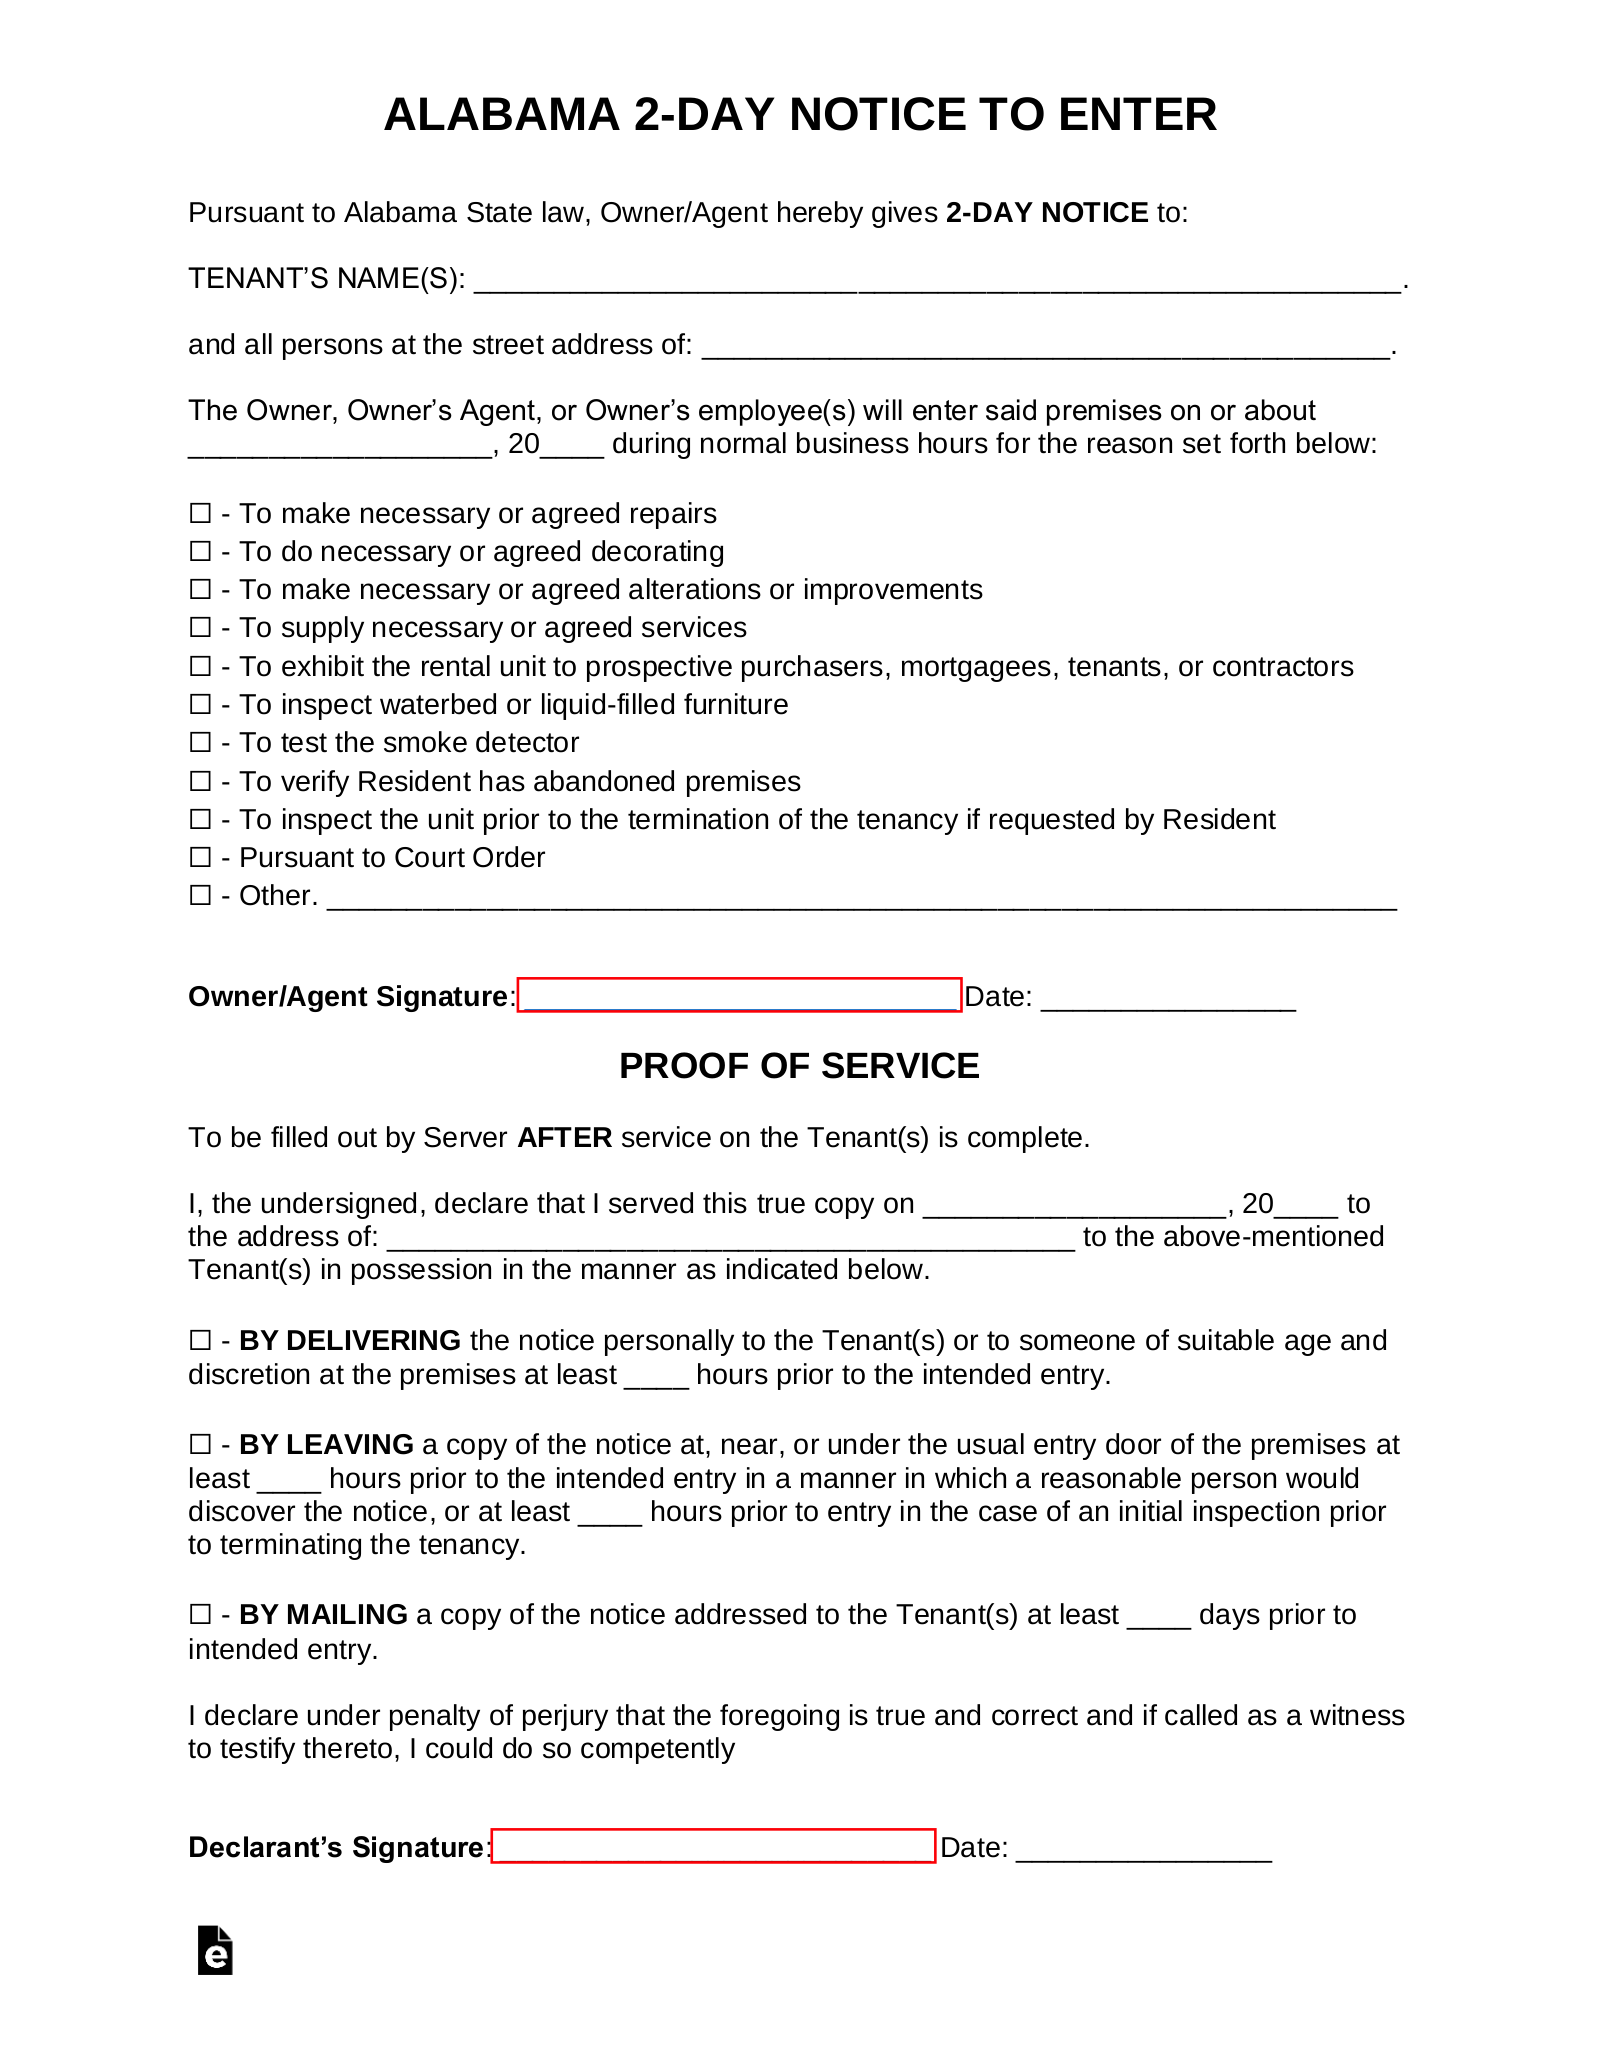 Alabama 2-Day Landlord Notice to Enter Form